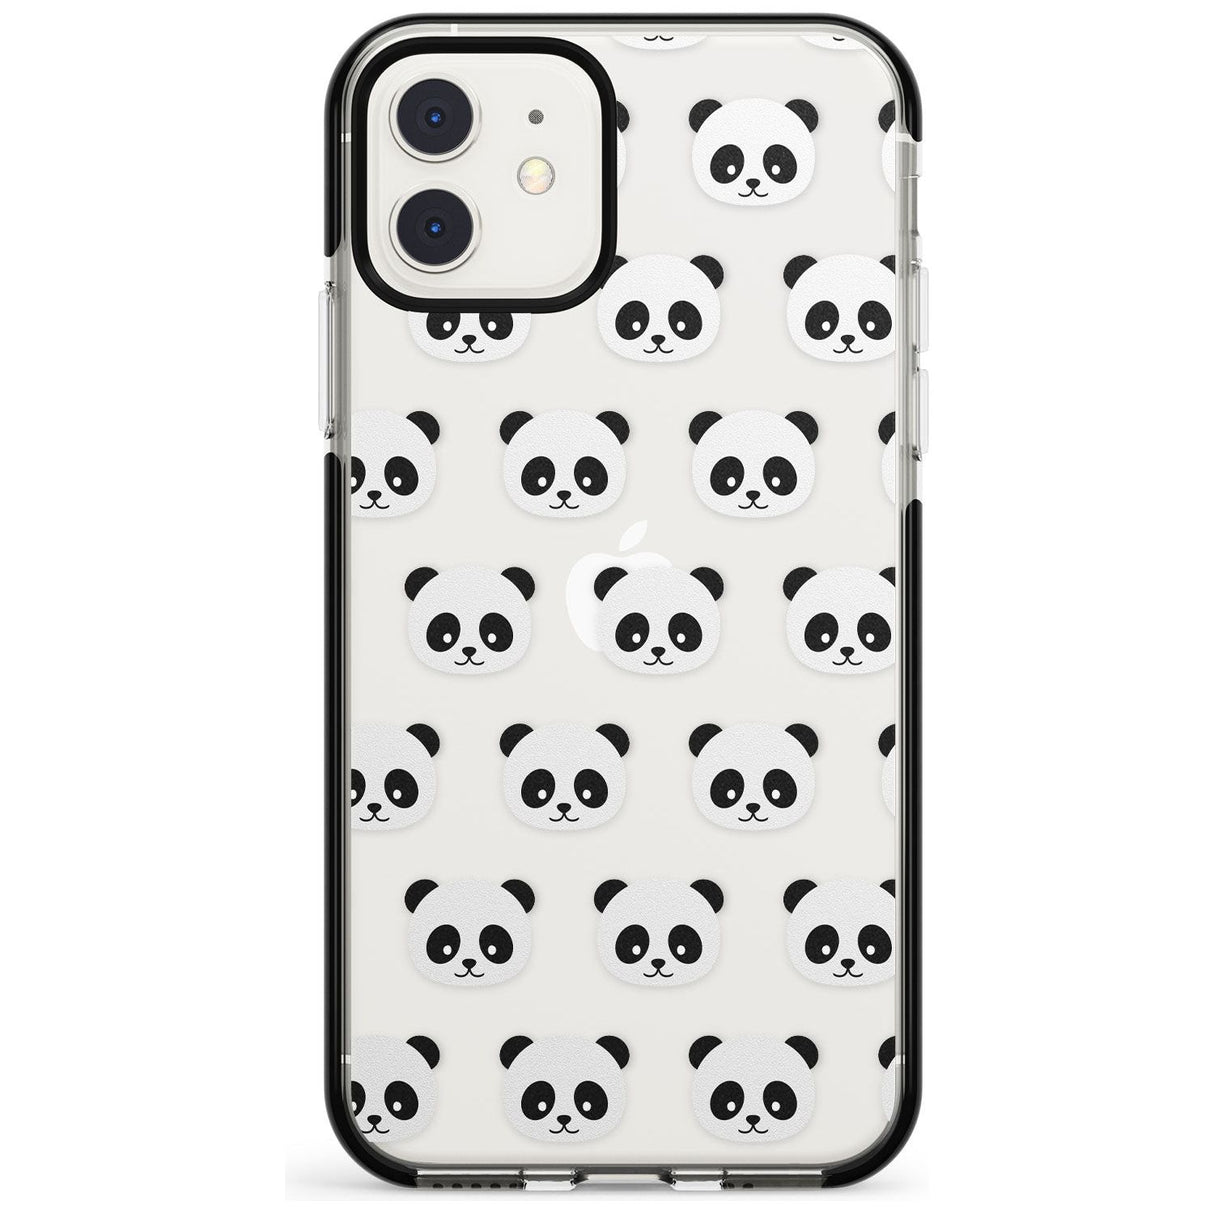 Panda Face Pattern Pink Fade Impact Phone Case for iPhone 11 Pro Max